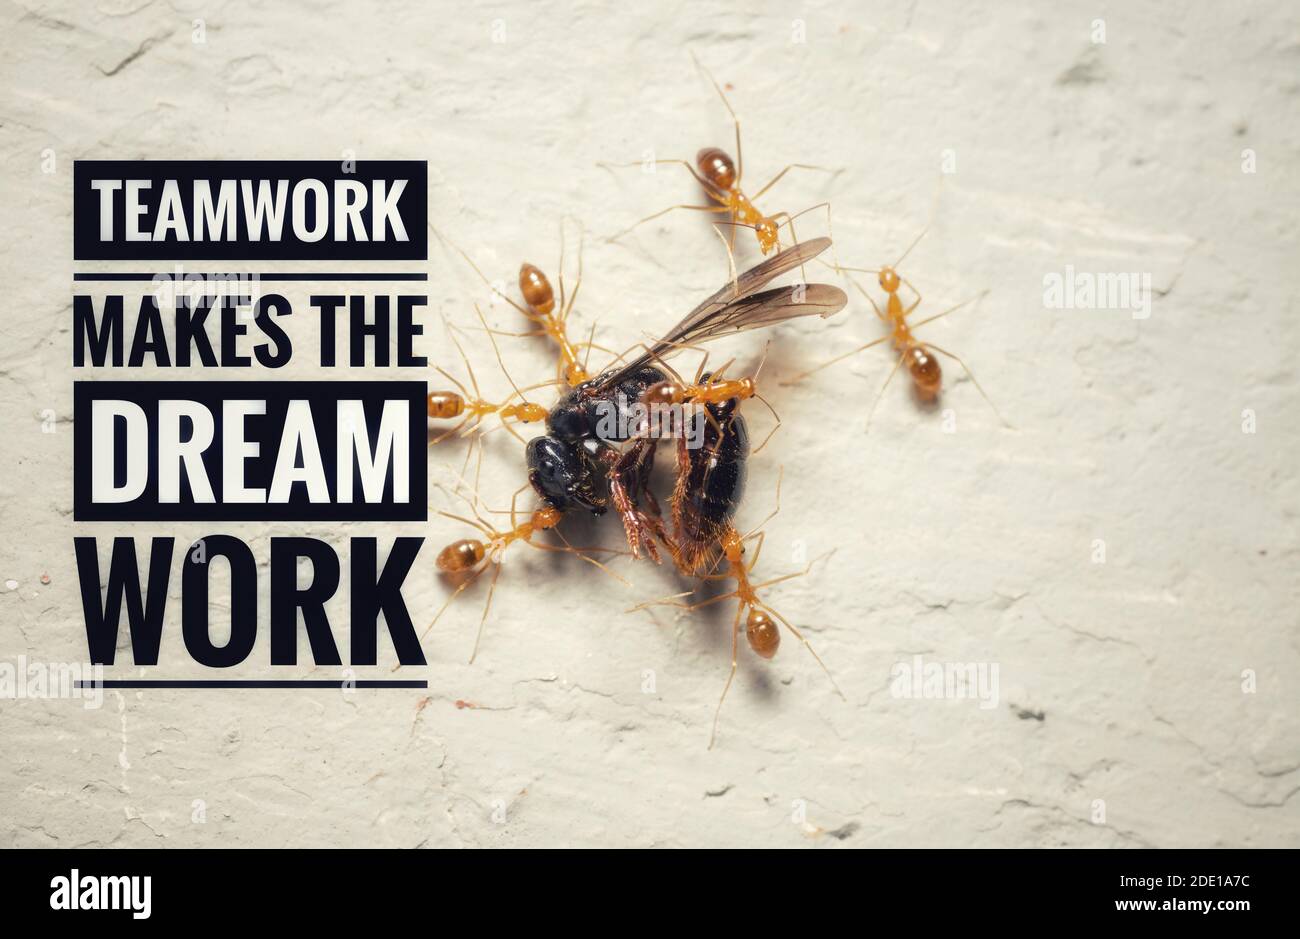 TEAMWORK MAKES THE DREAM WORK text and group of ants on plain background. Motivation and Quotes Concept Stock Photo